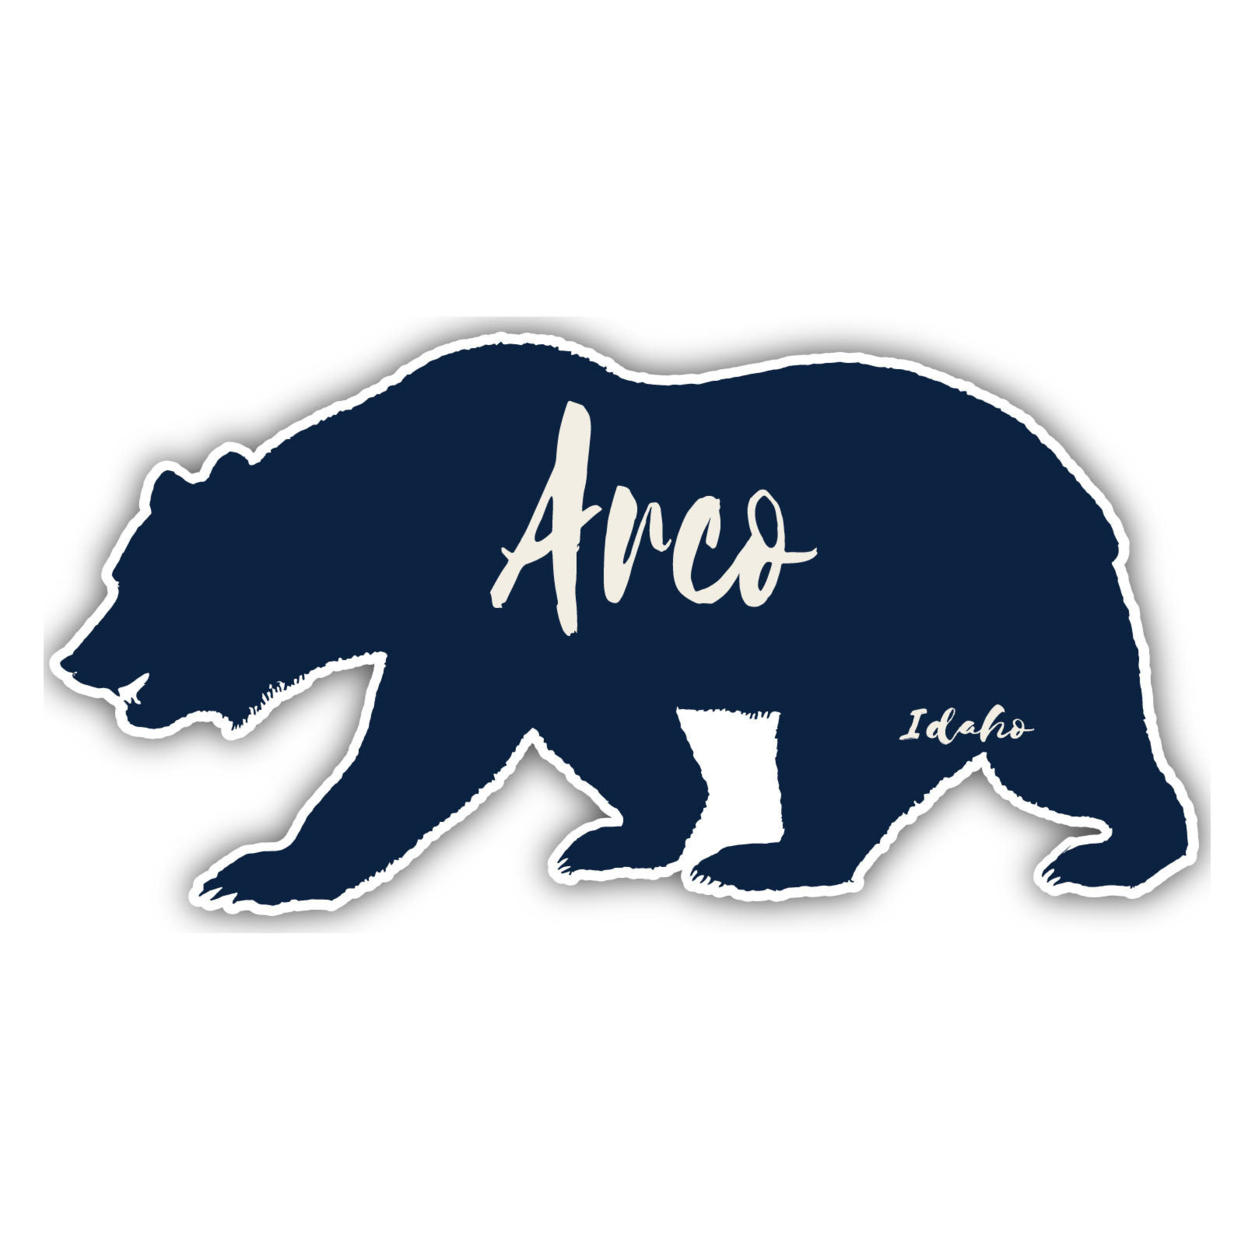 Arco Idaho Souvenir Decorative Stickers (Choose Theme And Size) - 4-Pack, 2-Inch, Bear